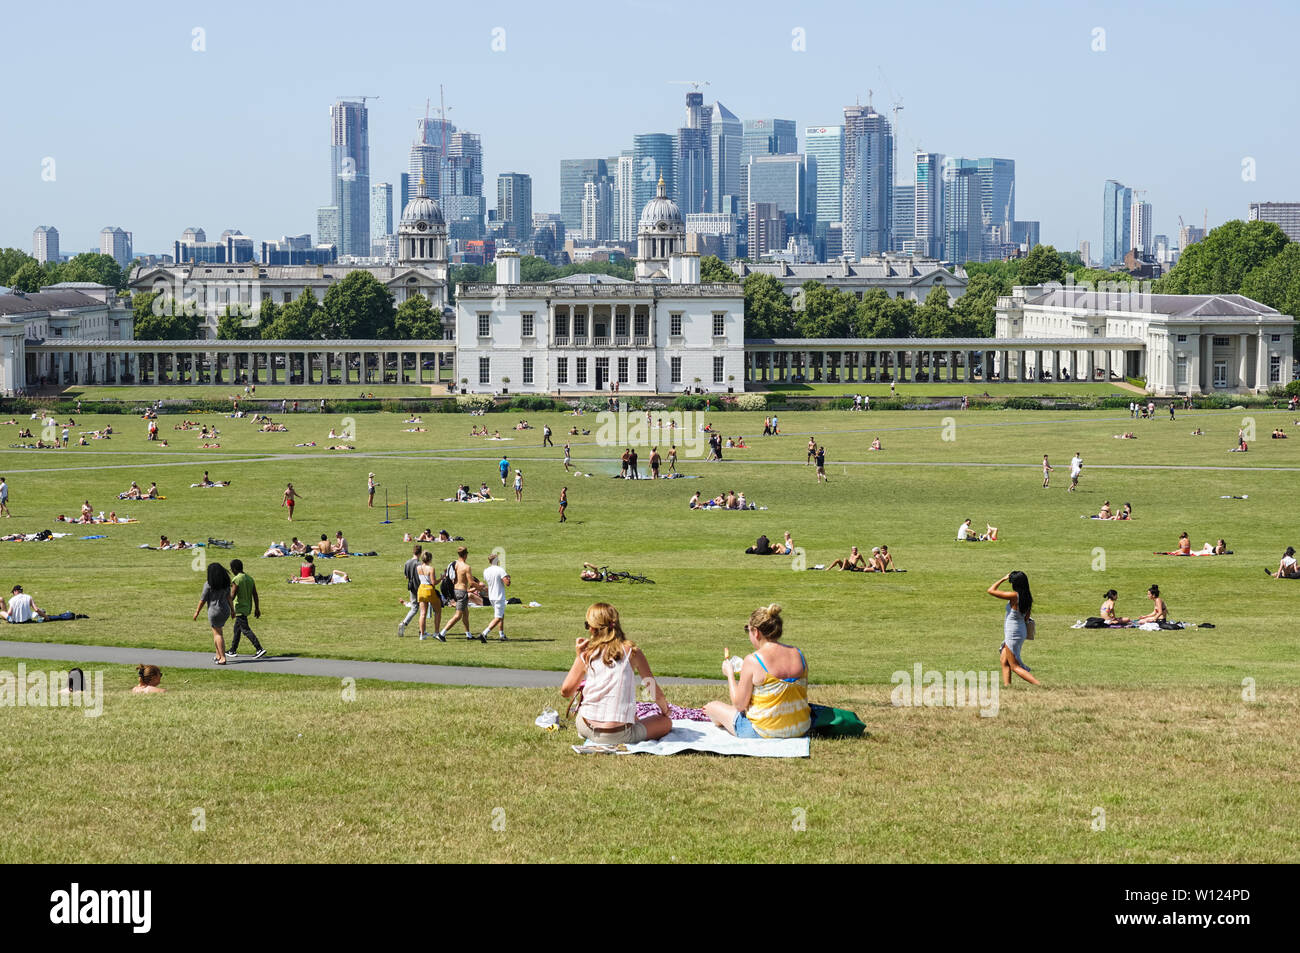 People enjoying hot and sunny day in Greenwich Park in London, England, United Kingdom, UK Stock Photo